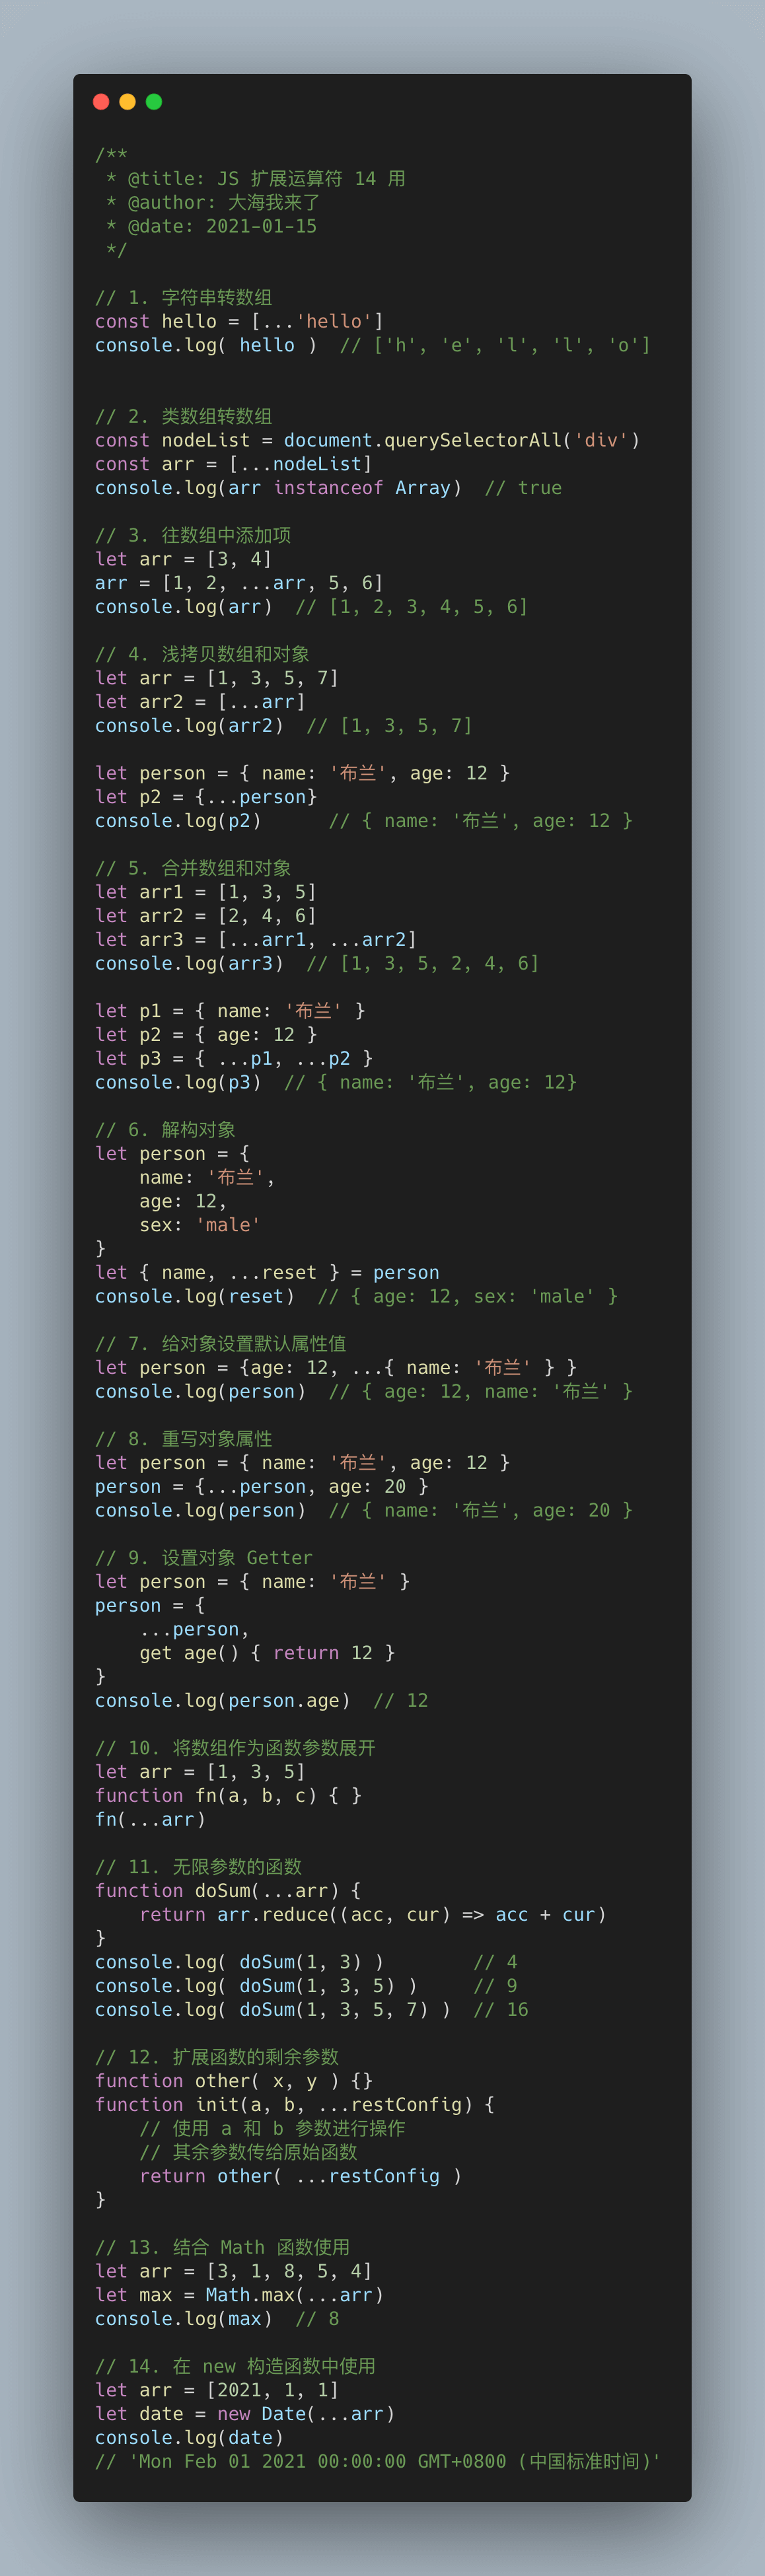 js_spread_operator.png